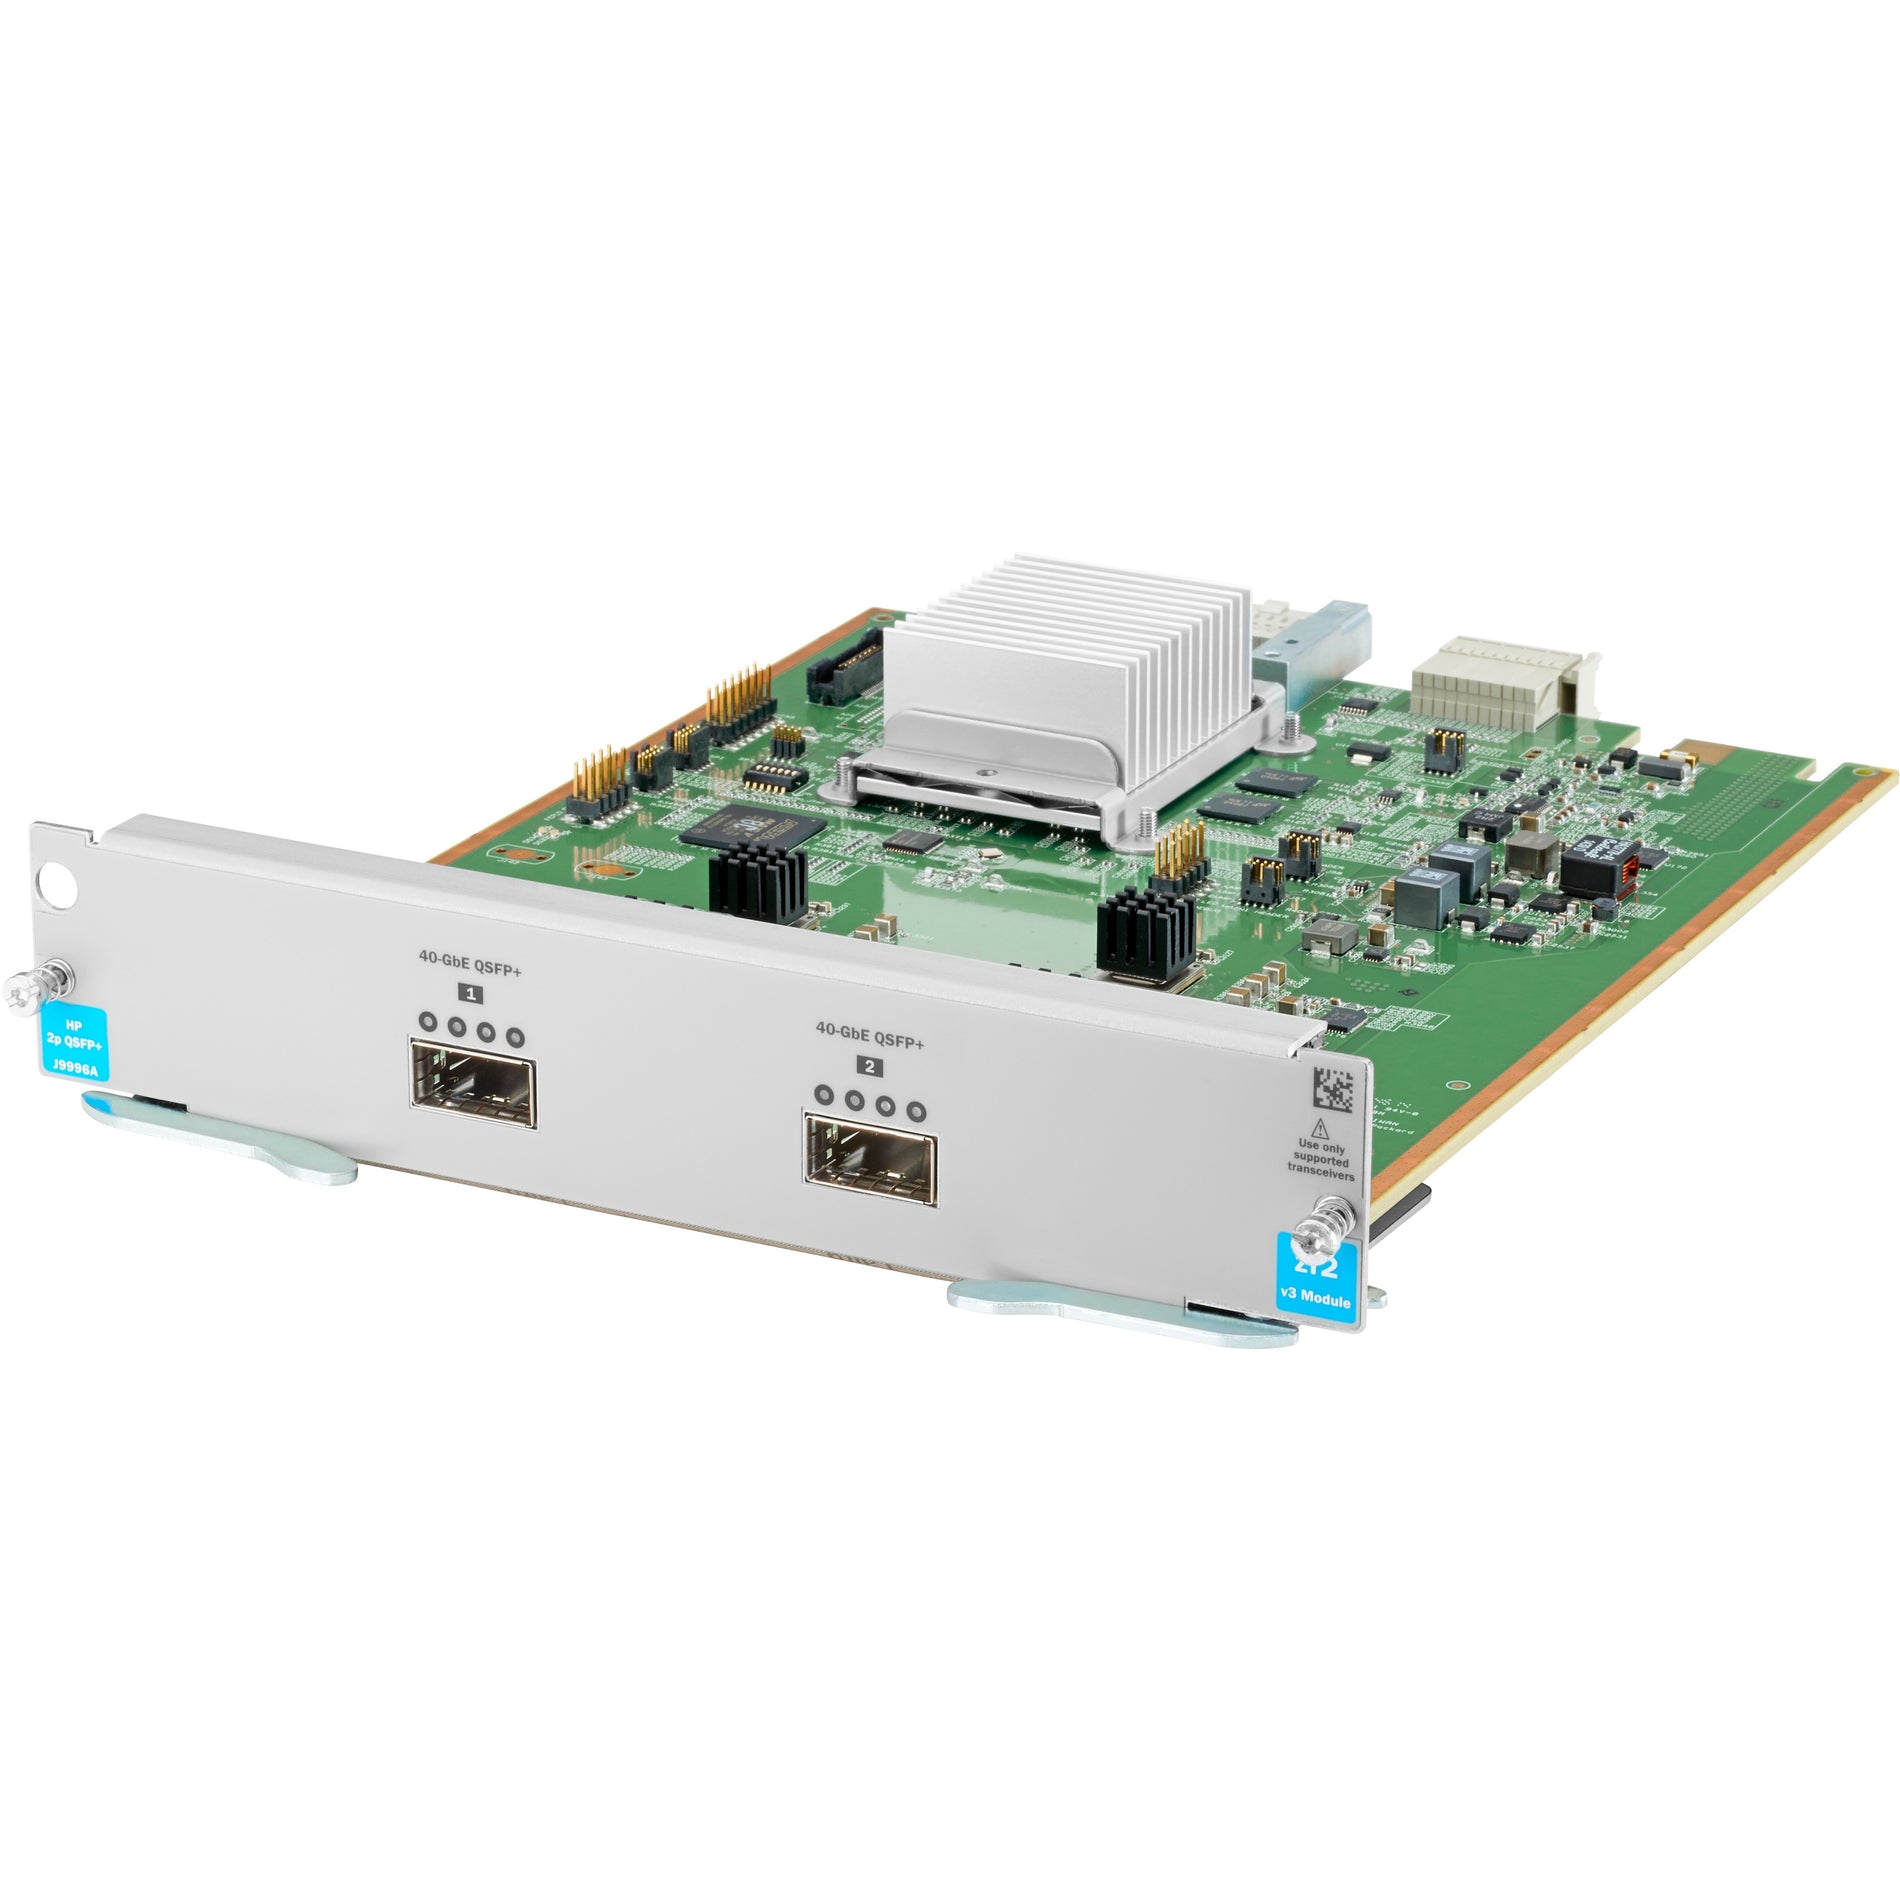 HPE J9996A 2-port 40GbE QSFP+ v3 zl2 Module, High-Speed Data Networking Solution